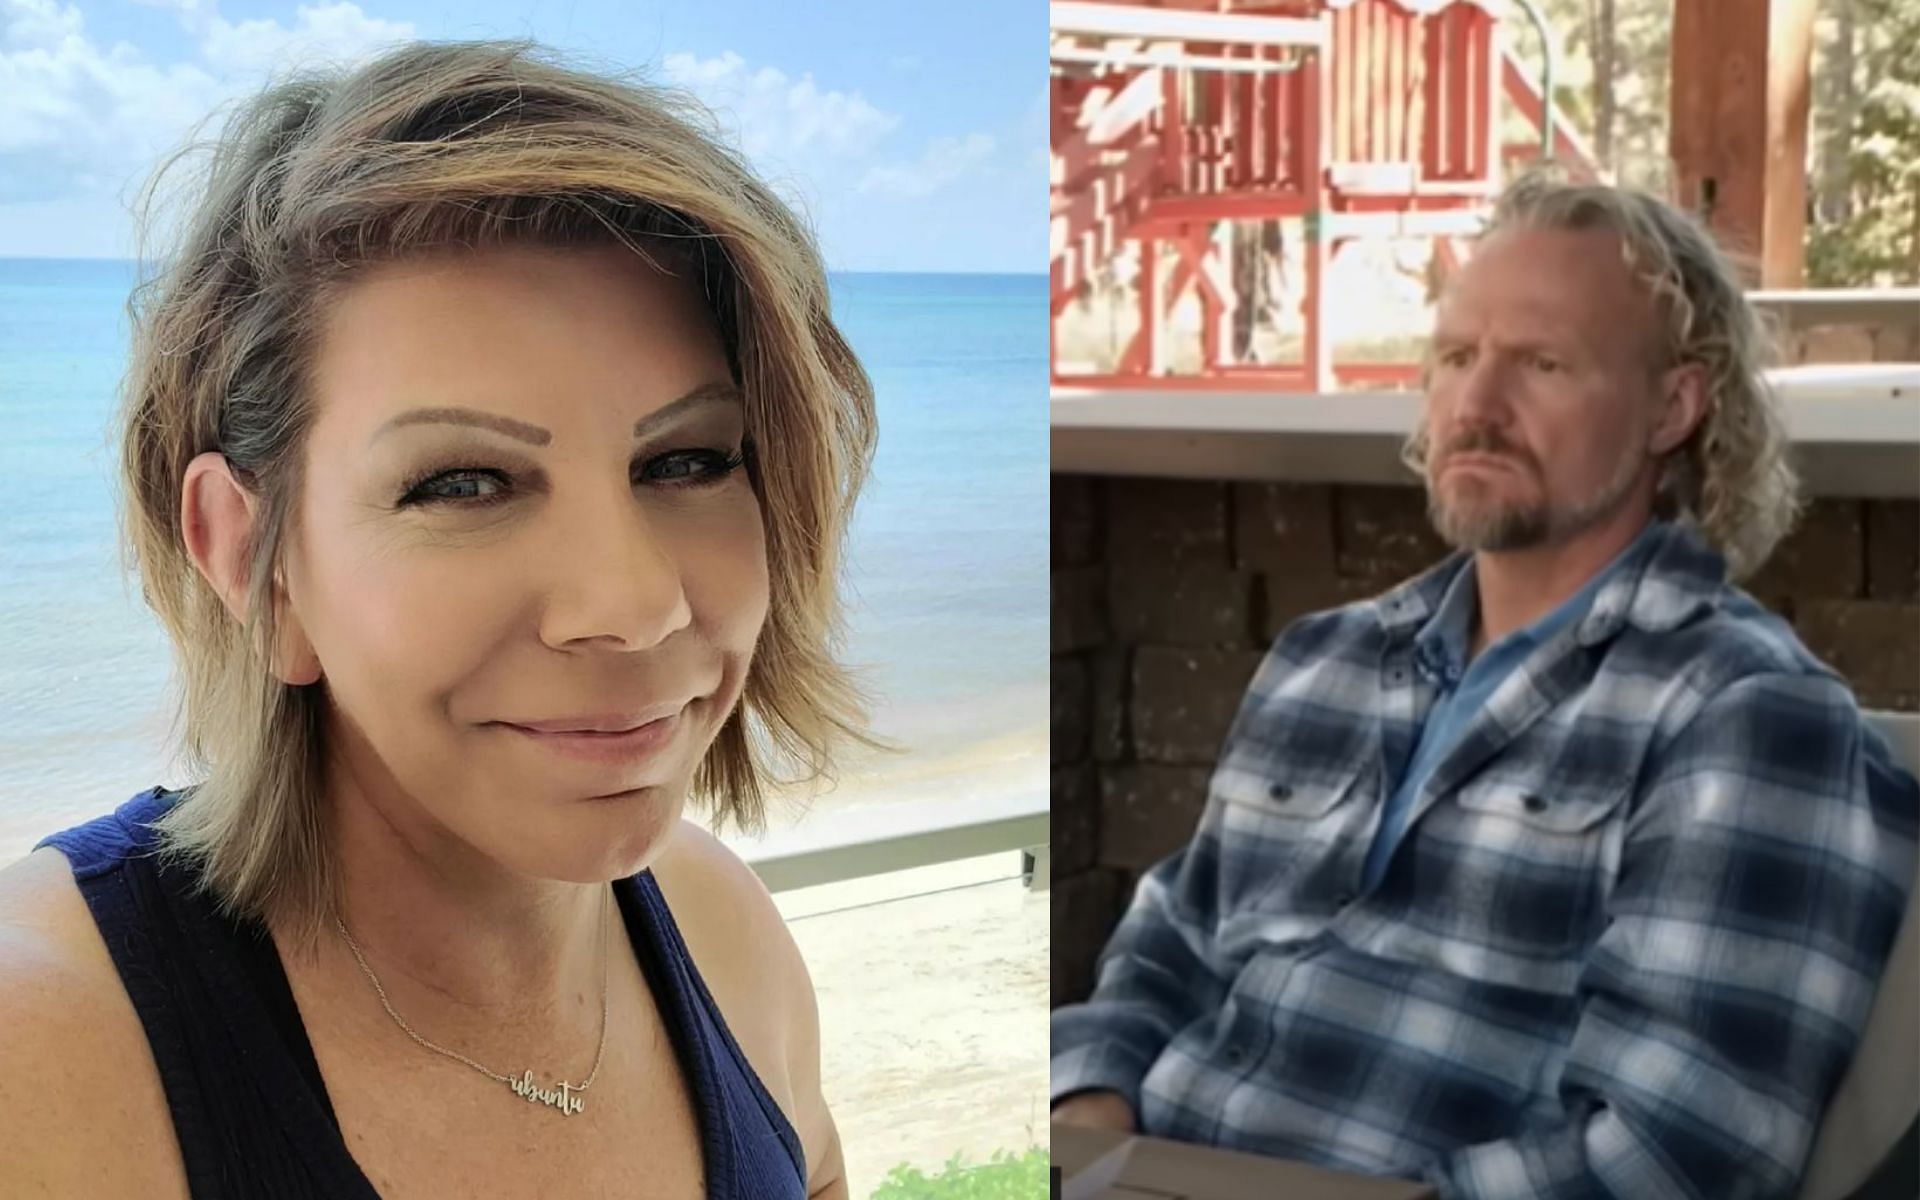 Will Kody and Meri split after 32 years? (Images via TLC and therealmeribrown/ Instagram)